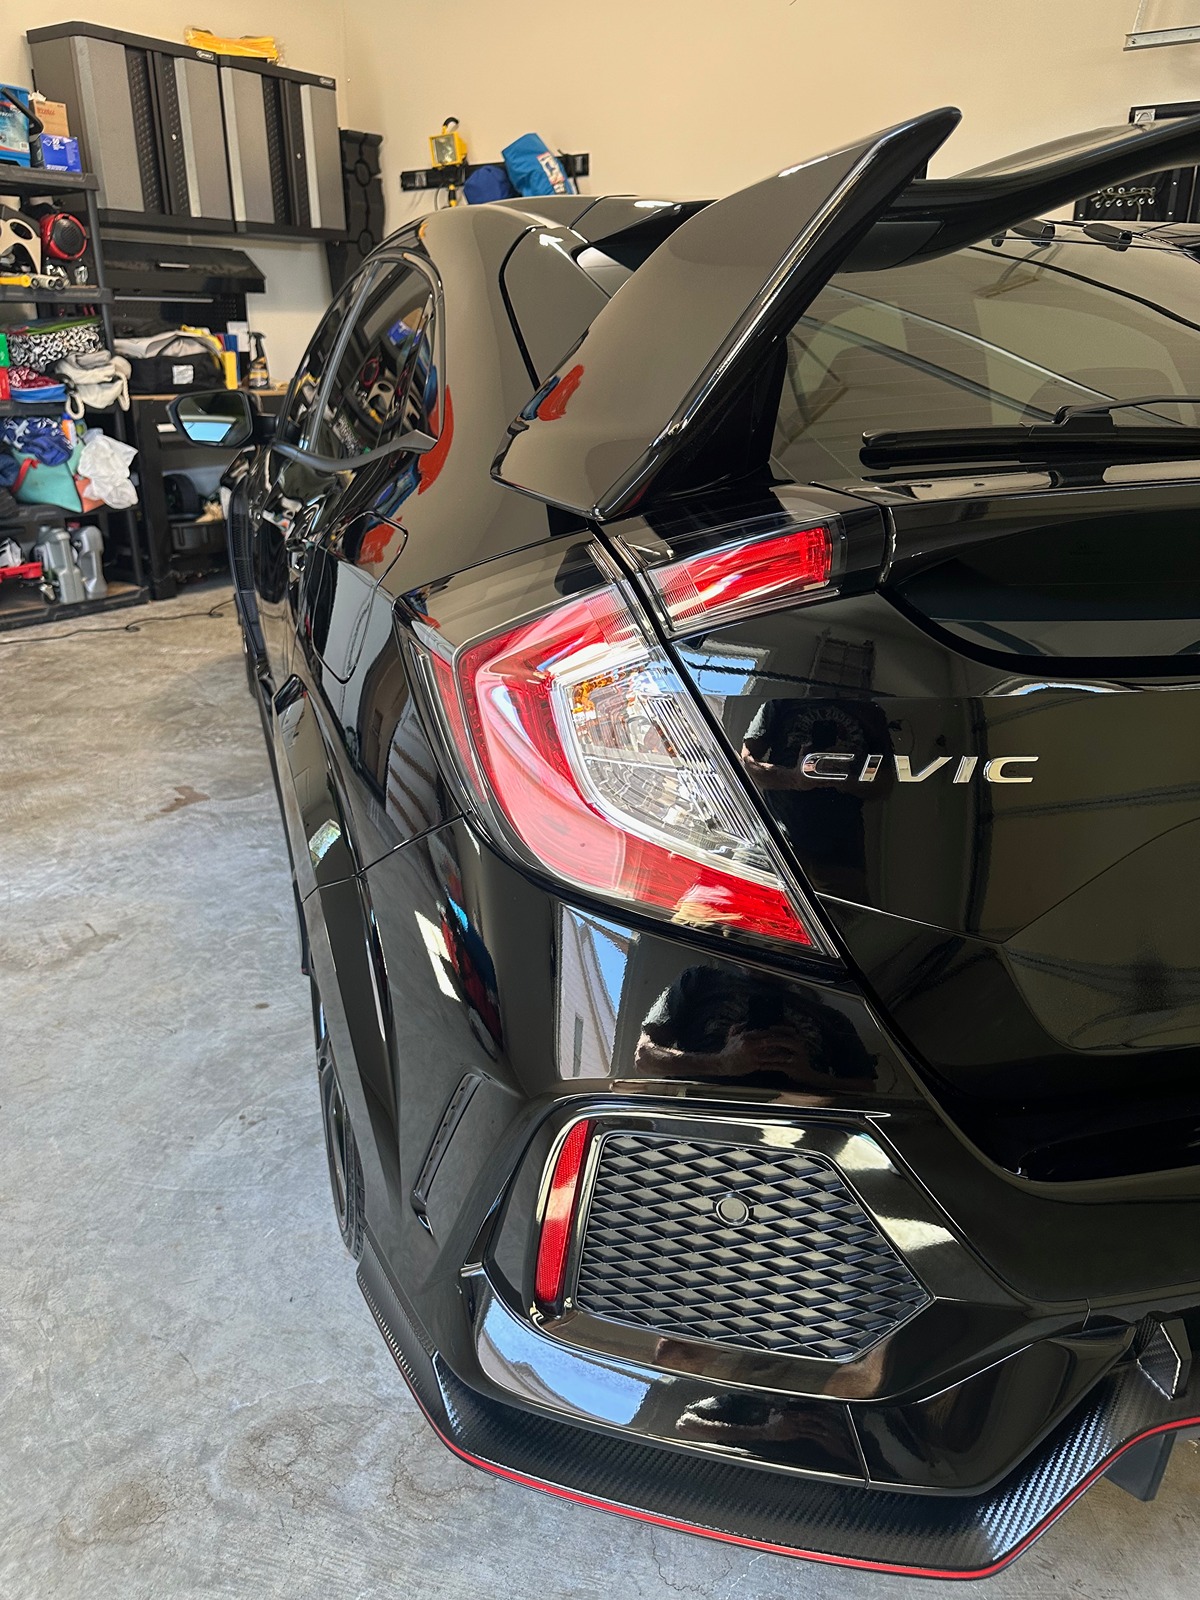 Honda Civic 10th gen Sold. 2019 Civic Type R for sale IMG_8221